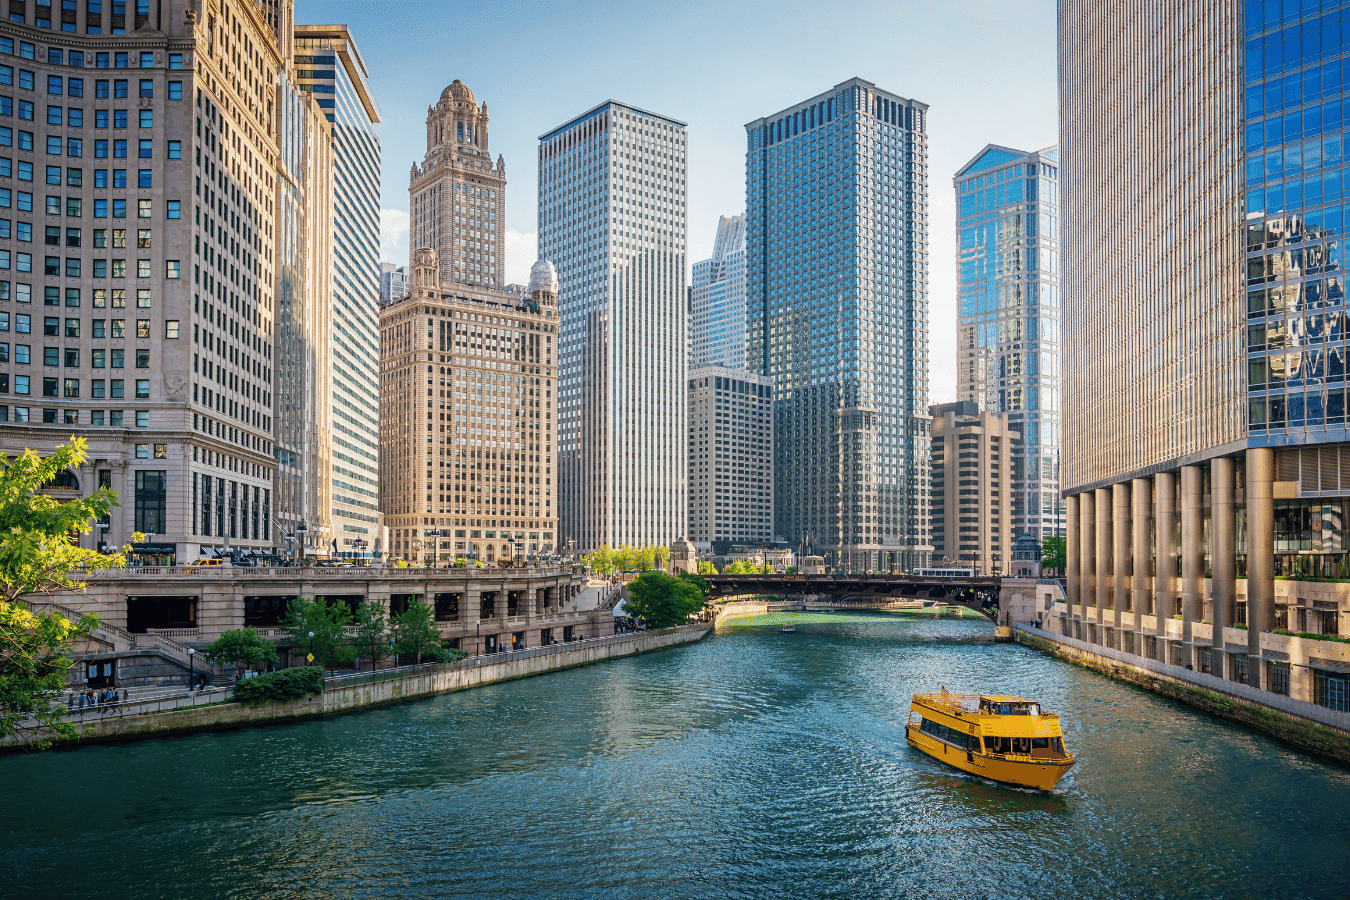 The city of Chicago is on the water